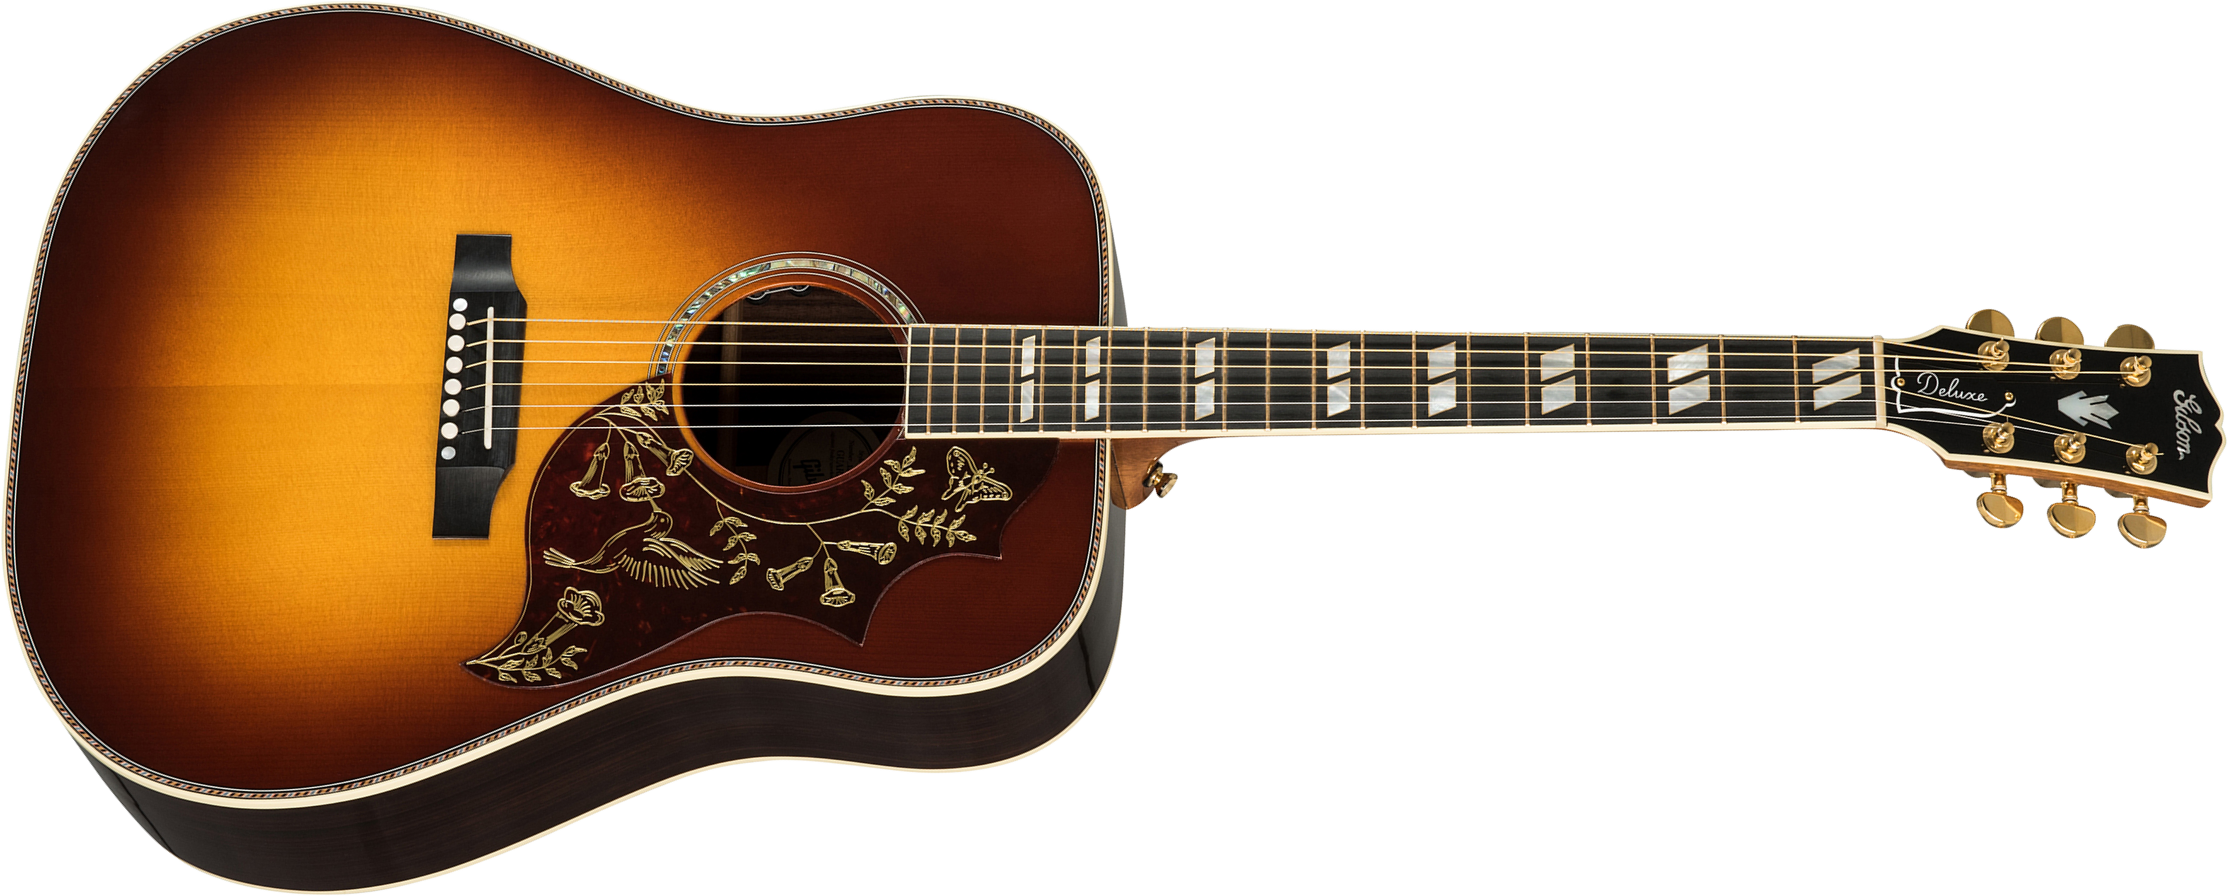 Gibson Custom Shop Hummingbird Deluxe Dreadnought Epicea Palissandre Eb - Rosewood Burst - Guitare Electro Acoustique - Main picture